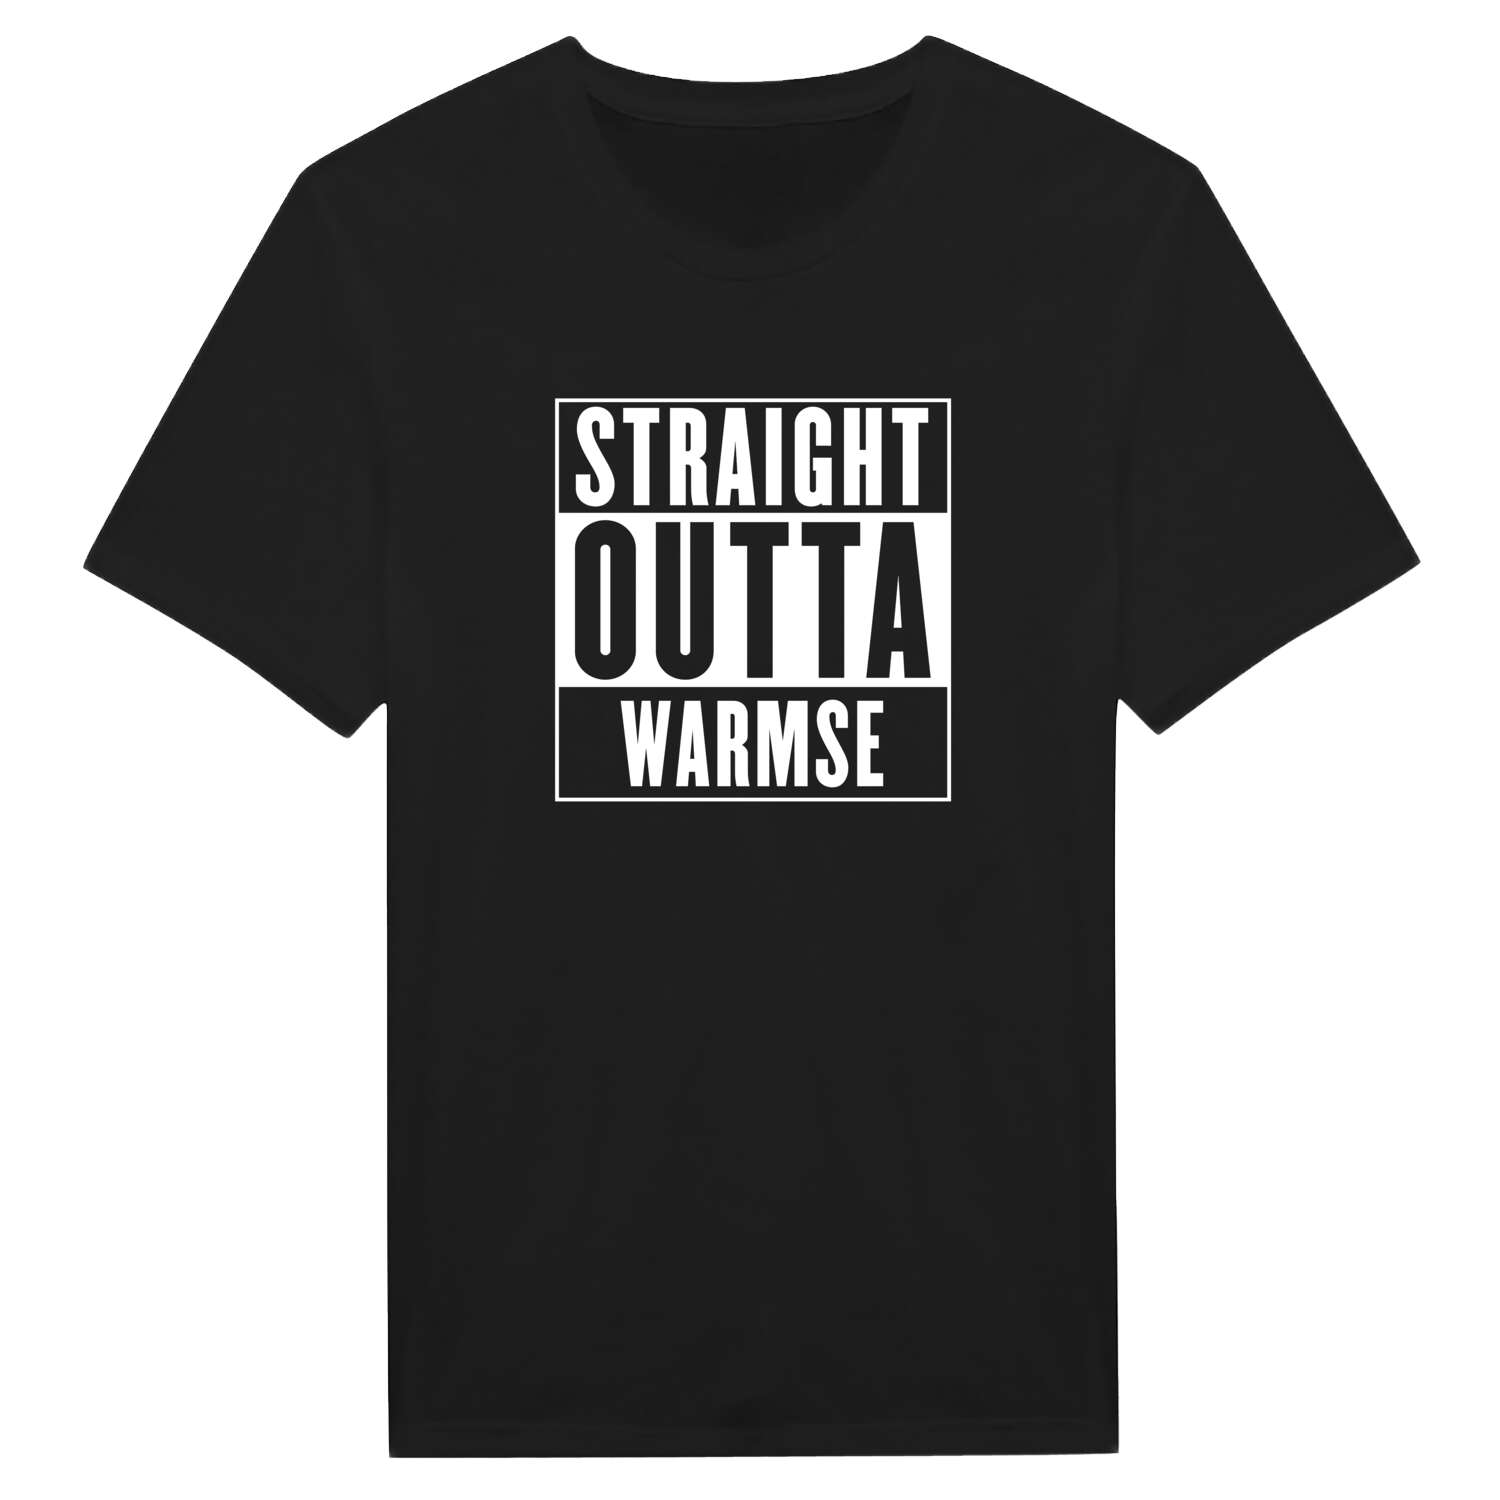 Warmse T-Shirt »Straight Outta«